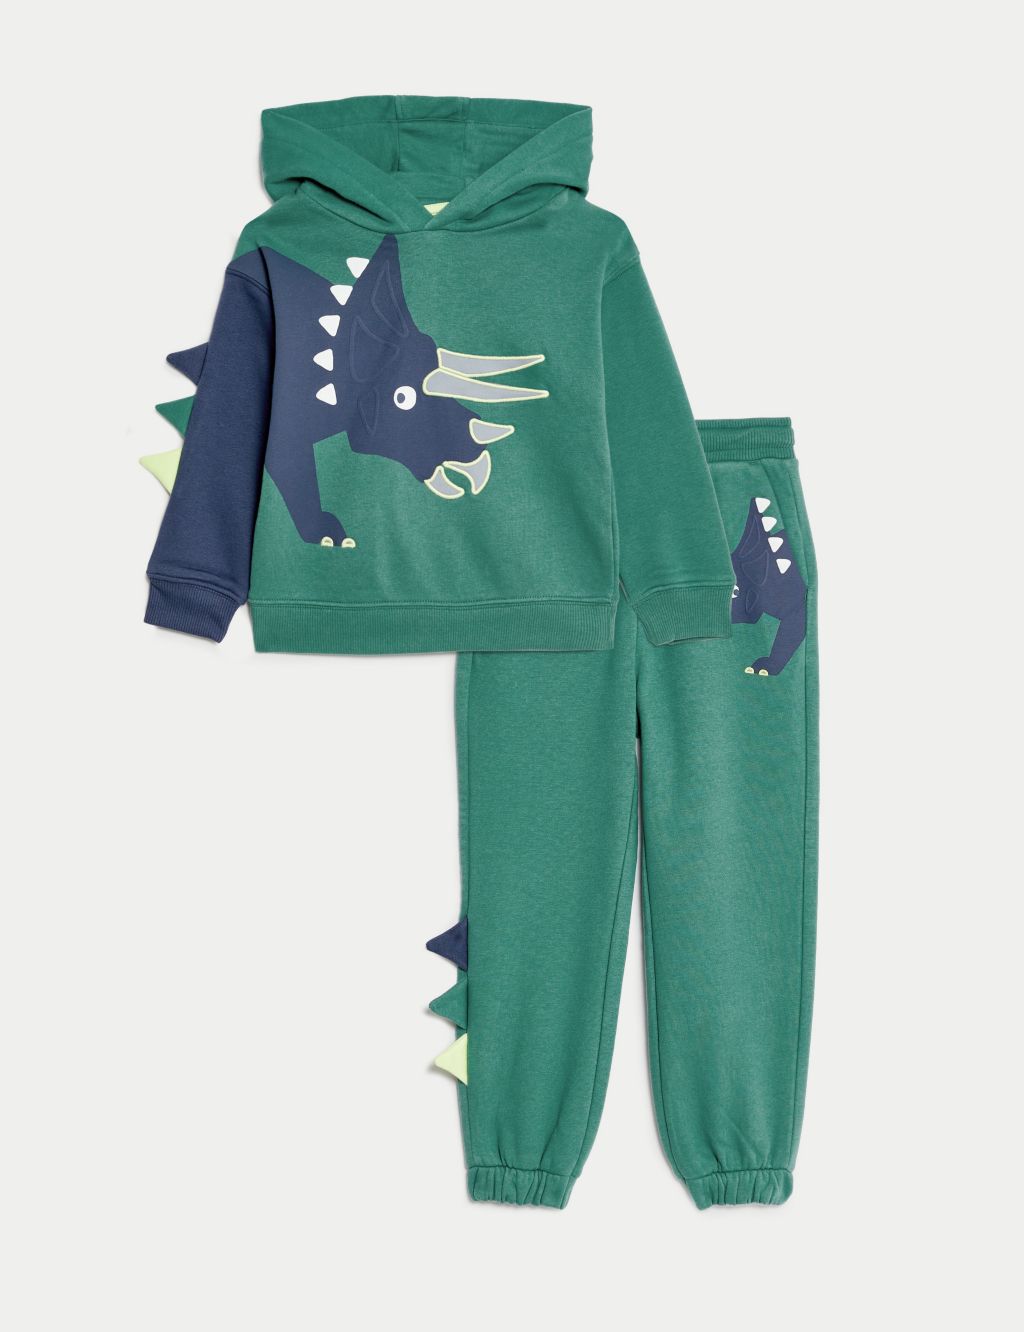 2pc Cotton Rich Dinosaur Outfit (2-8 Yrs) image 2